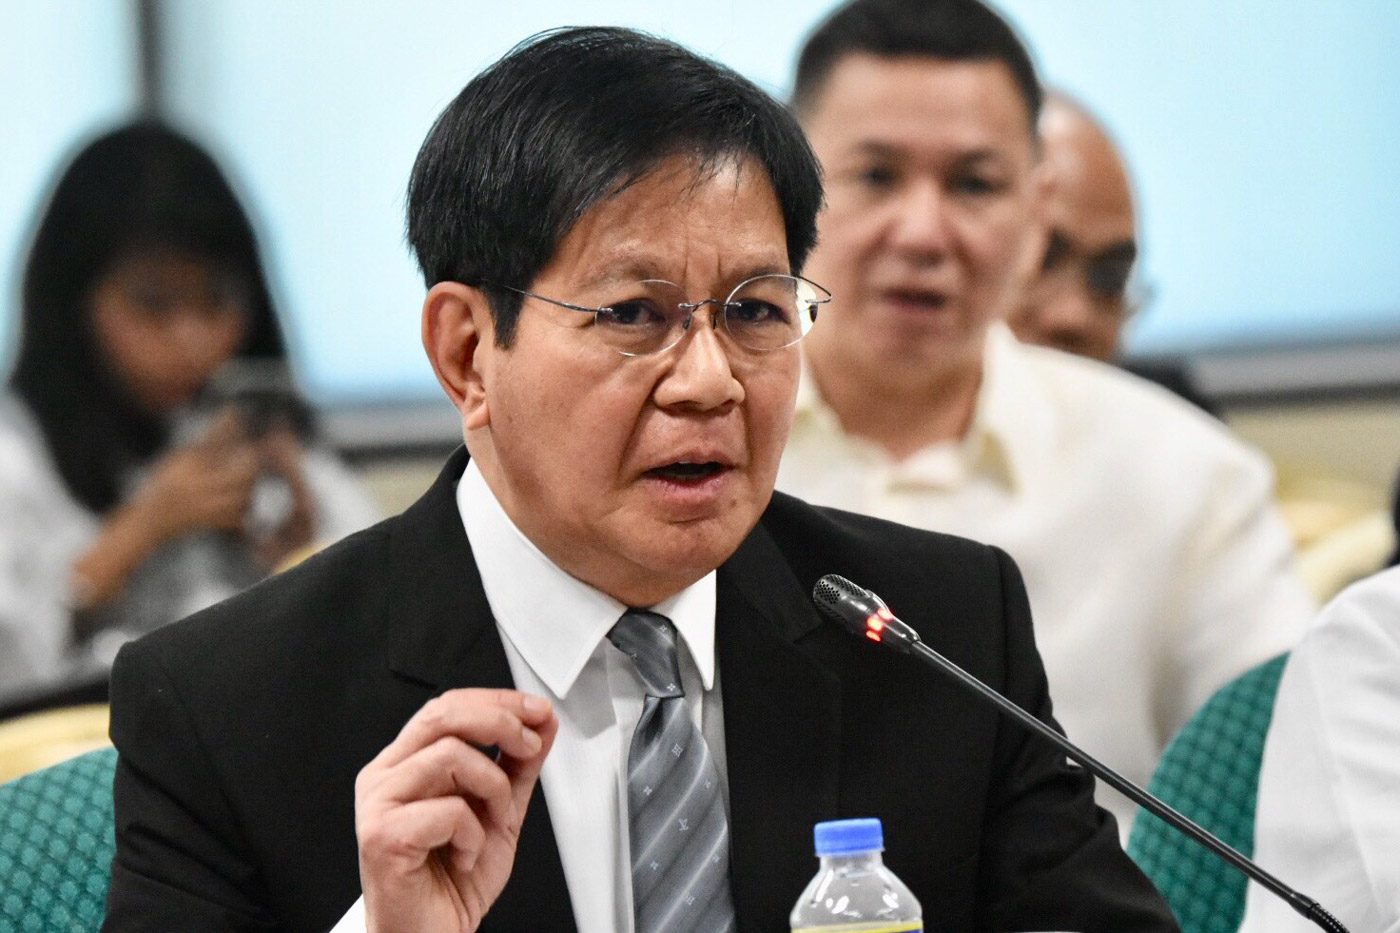 Lacson questions landing of China plane in PH: ‘We might wake up a colony’